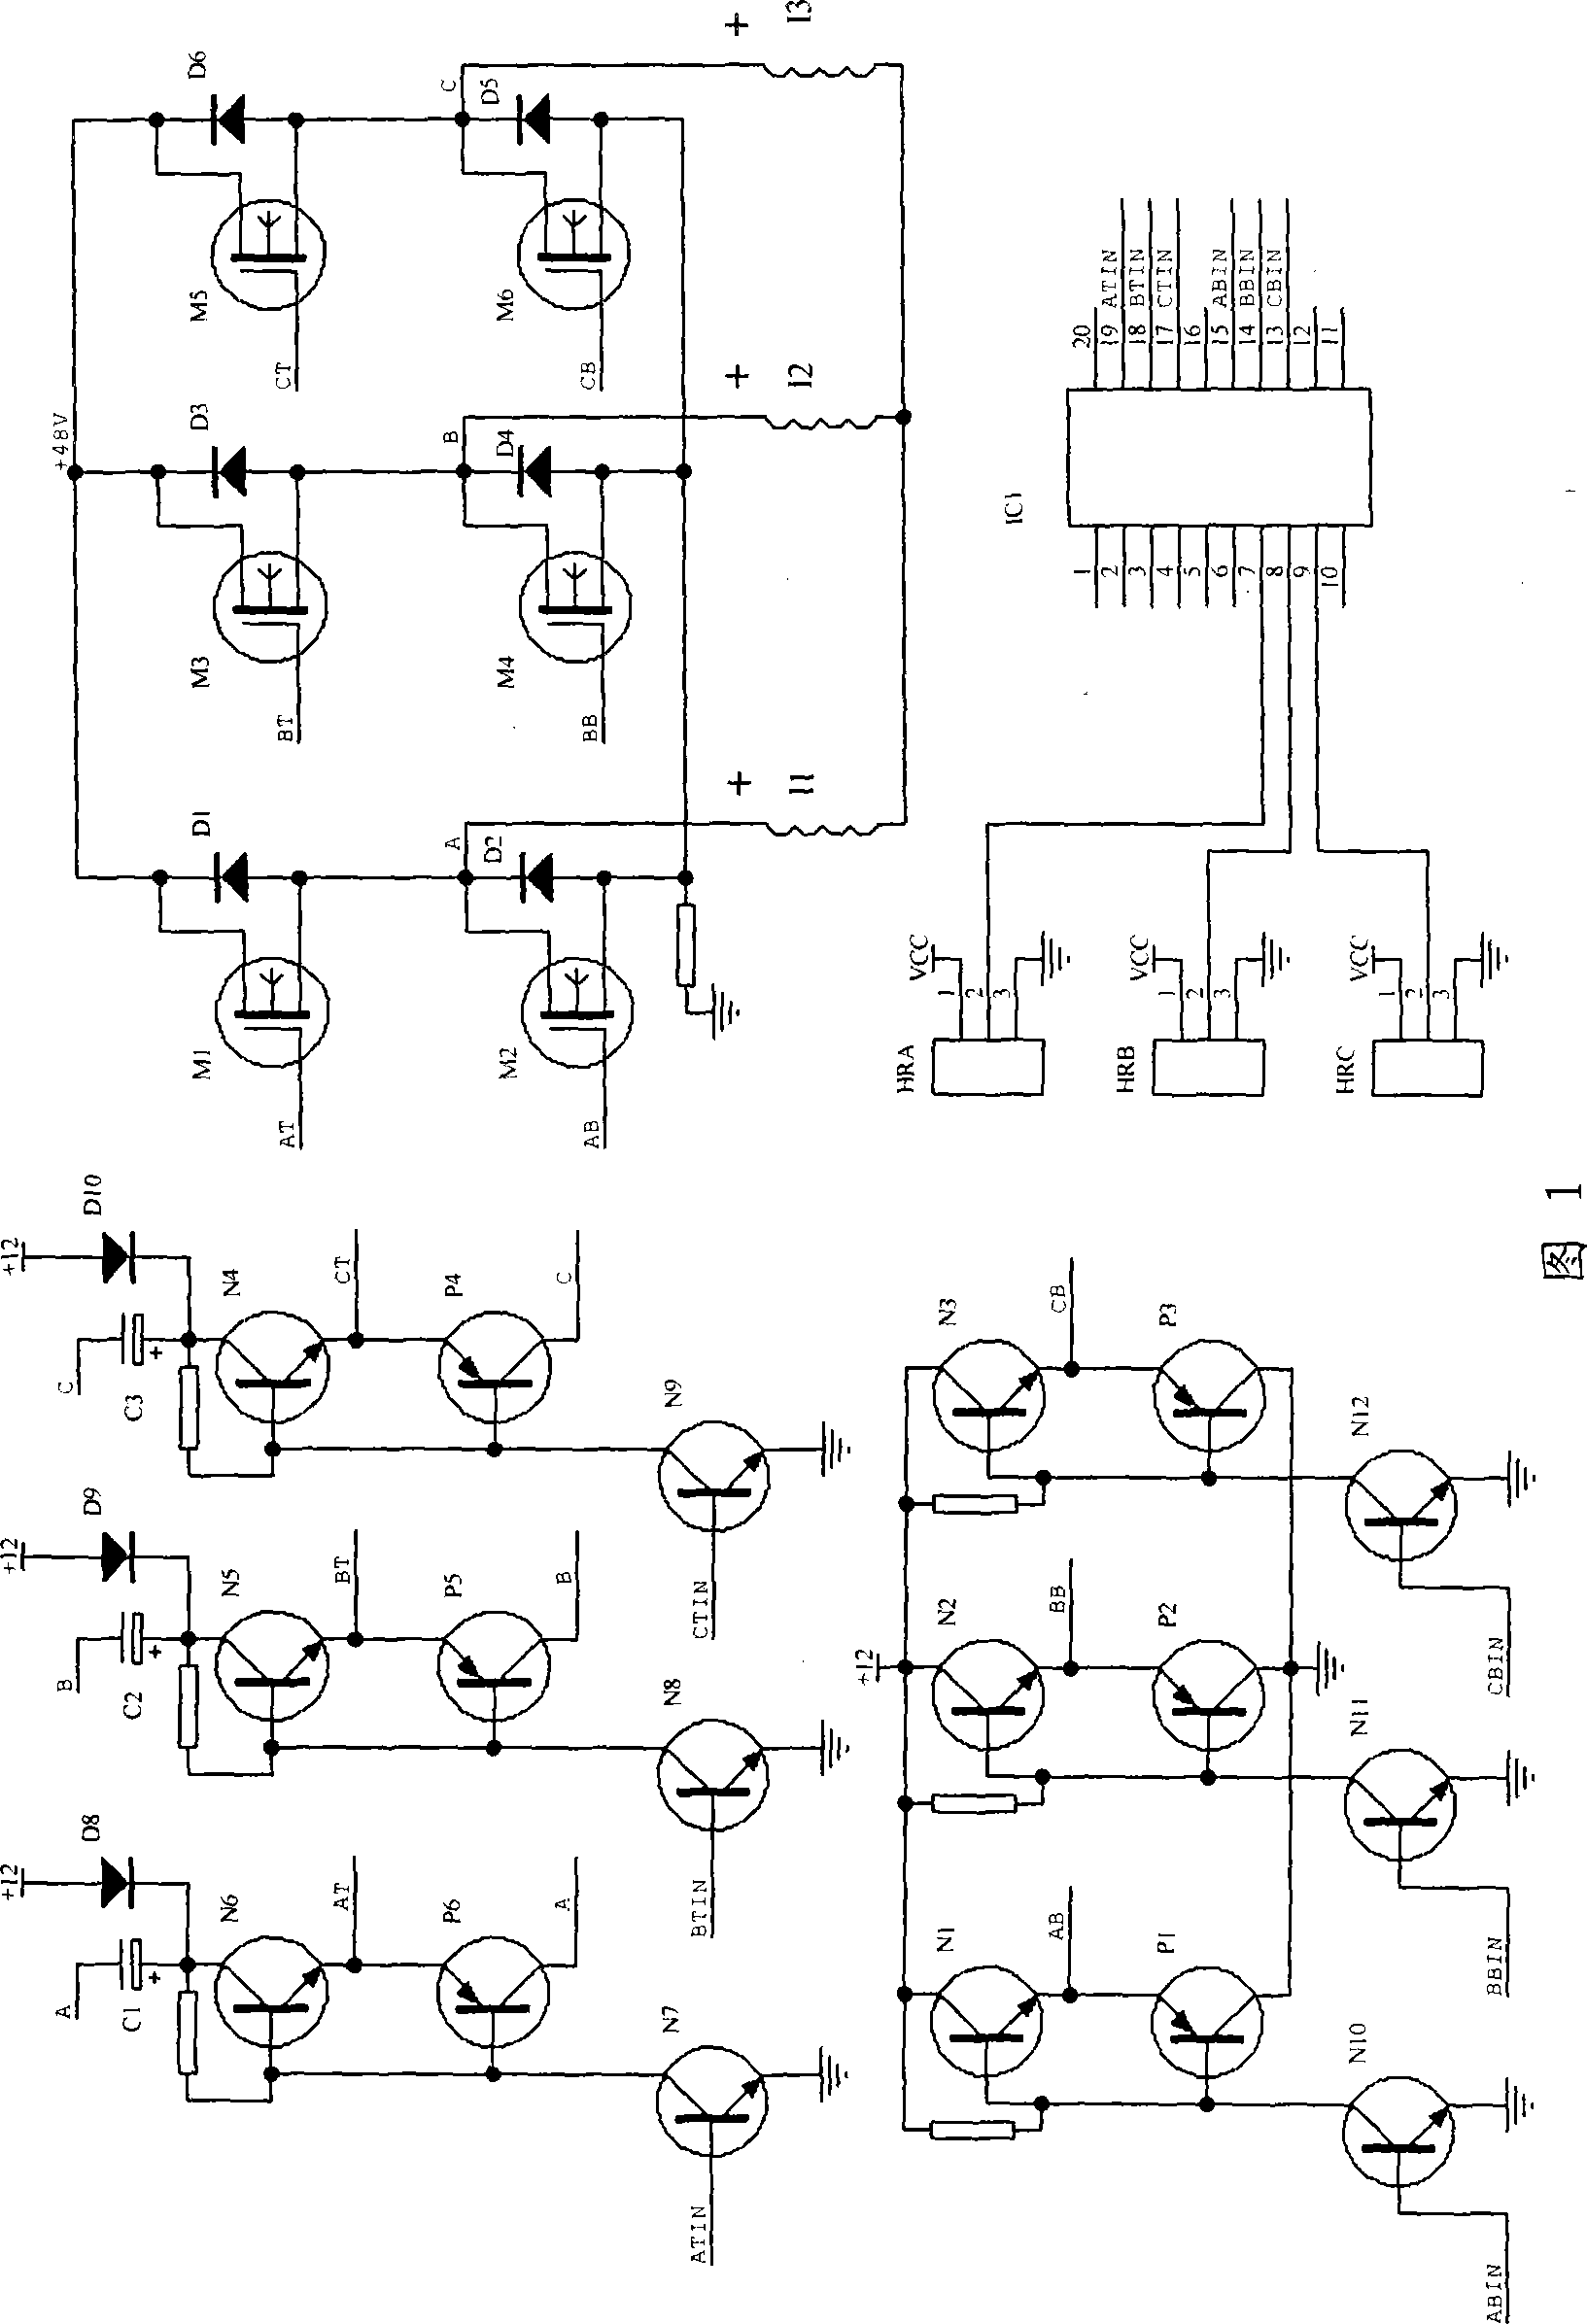 Motor driver and control circuit board